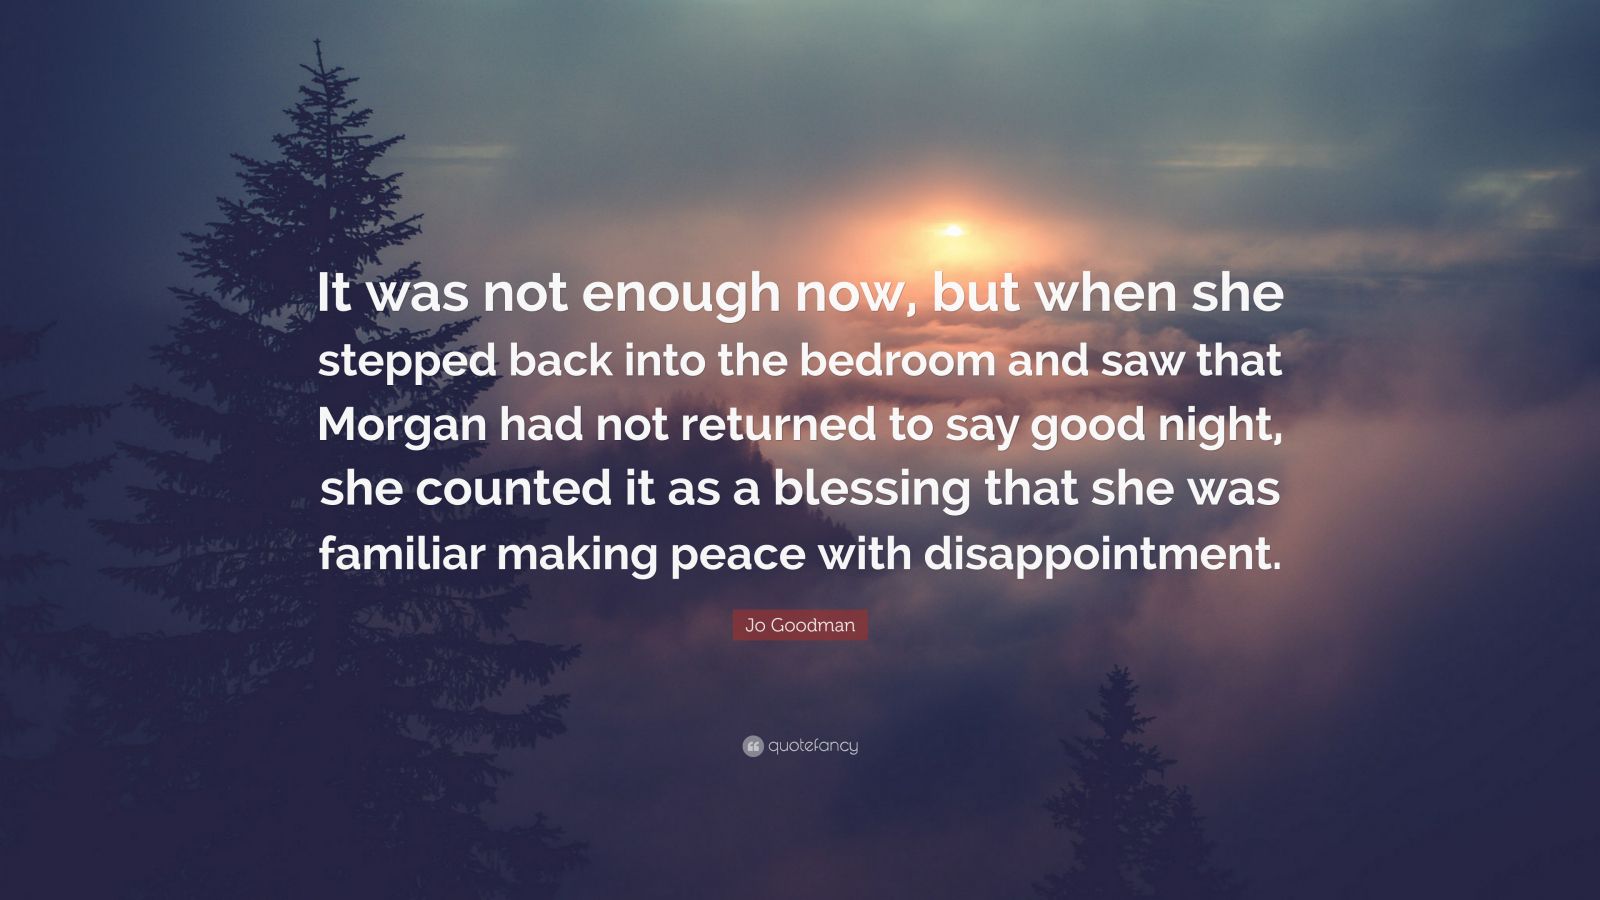 Jo Goodman Quote: “Finally, Jane found disappointment. It was